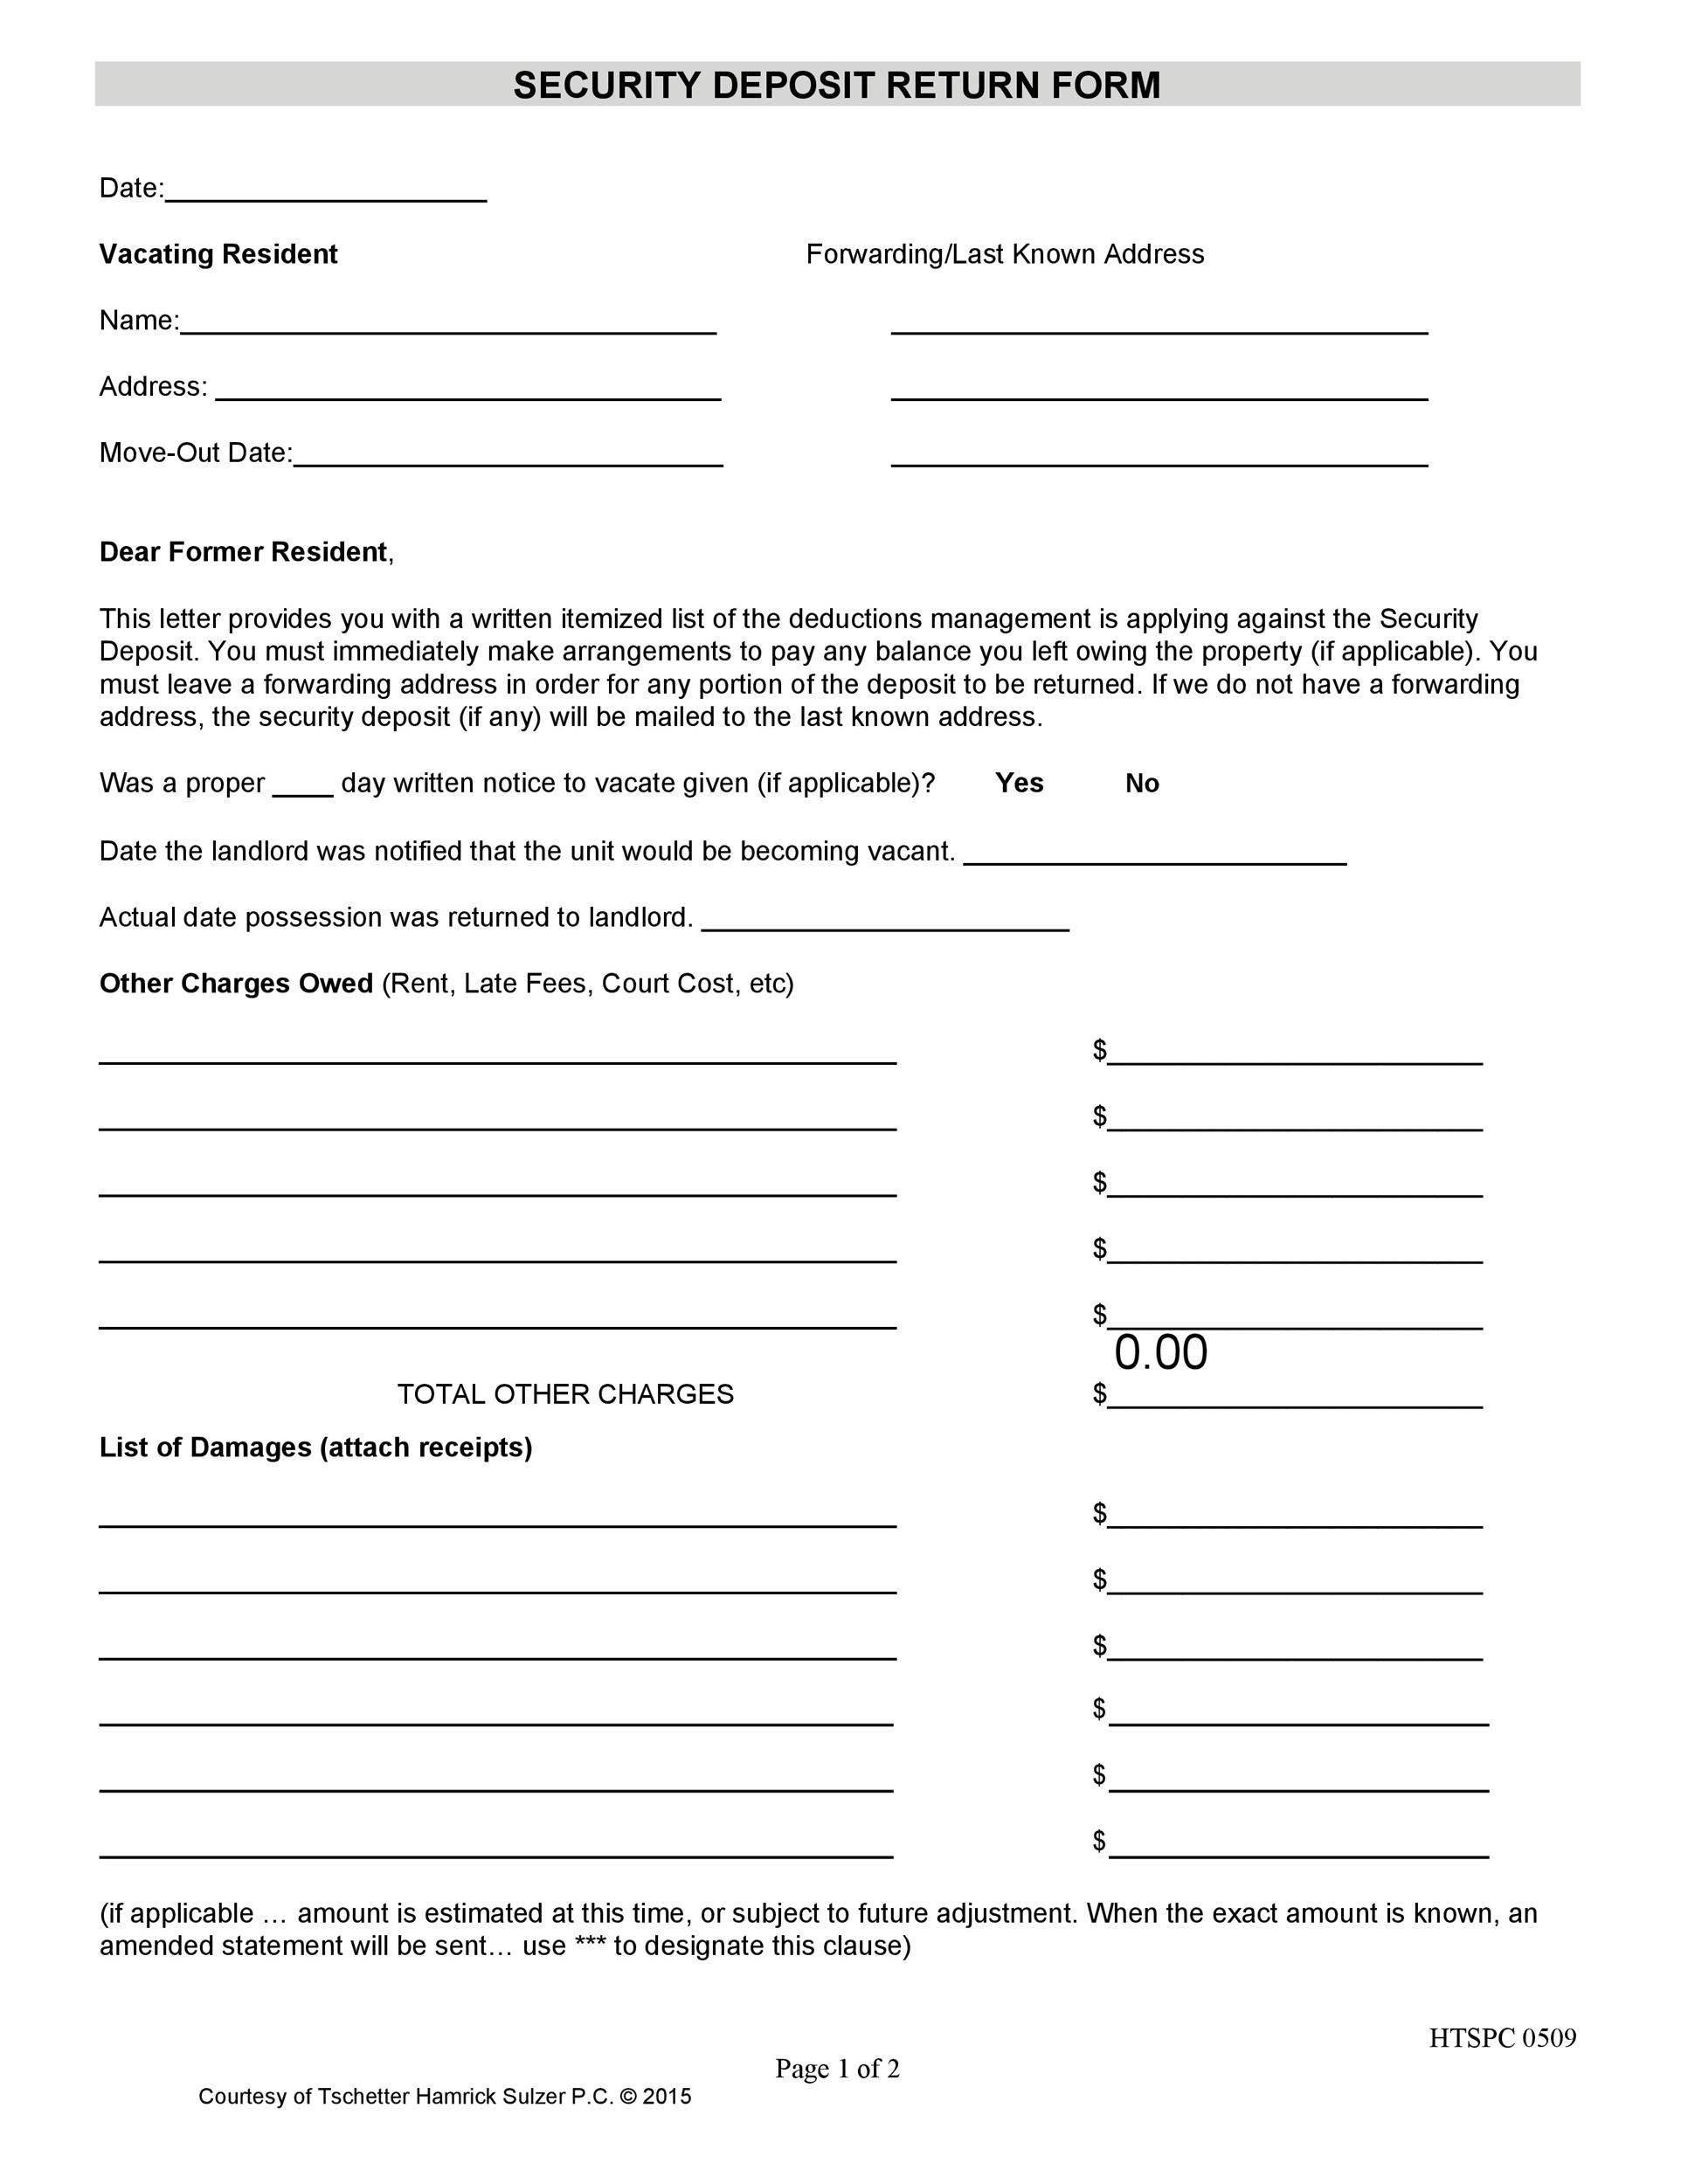 10 Effective Security Deposit Return Letters [MS Word] ᐅ TemplateLab With Regard To Refund Security Deposit Form Intended For Refund Security Deposit Form